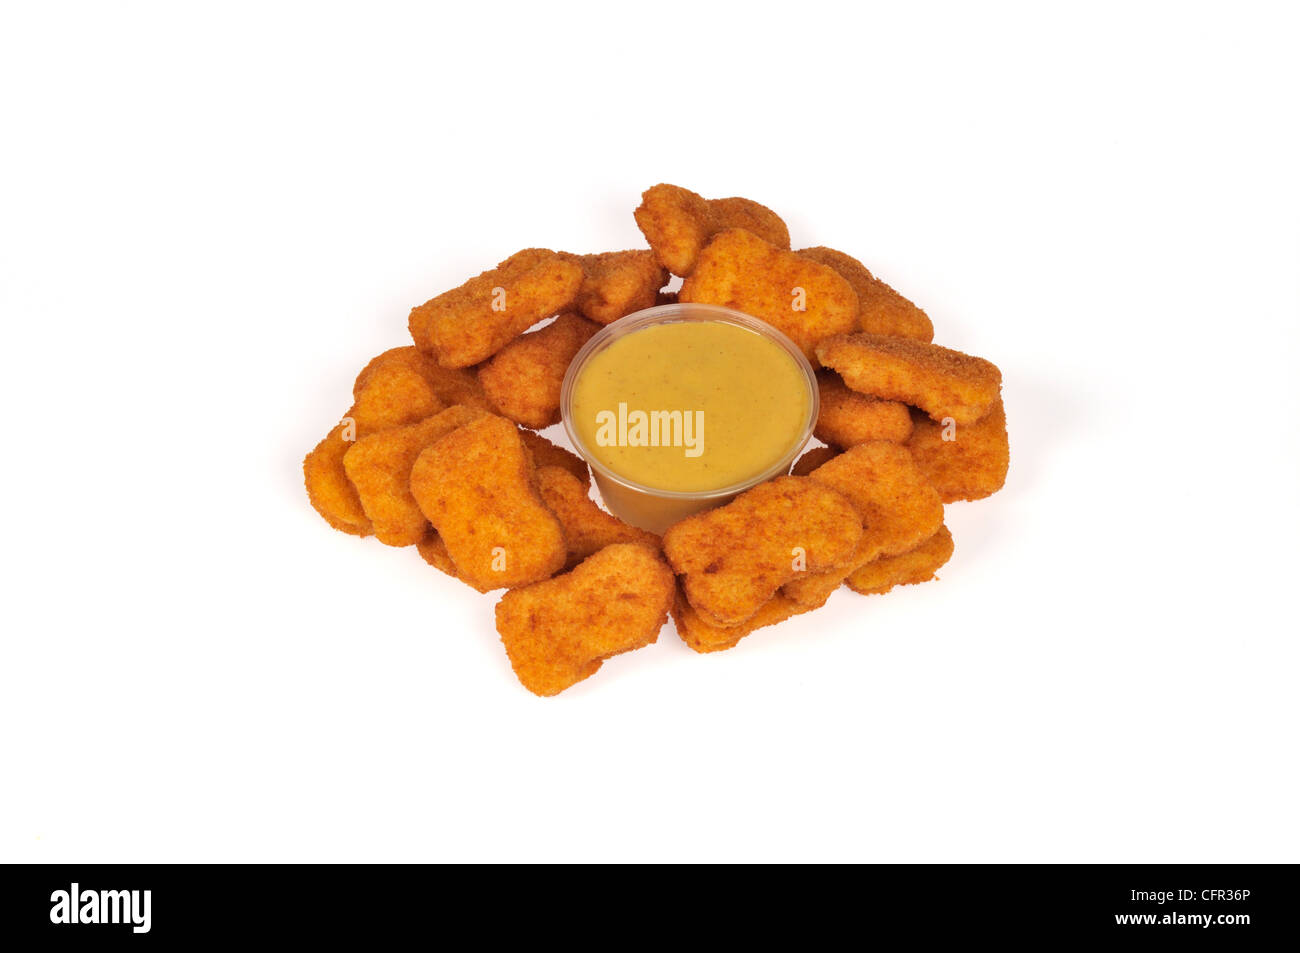 Breaded chicken nuggets around a container of honey mustard dipping sauce on white background cut out. Stock Photo